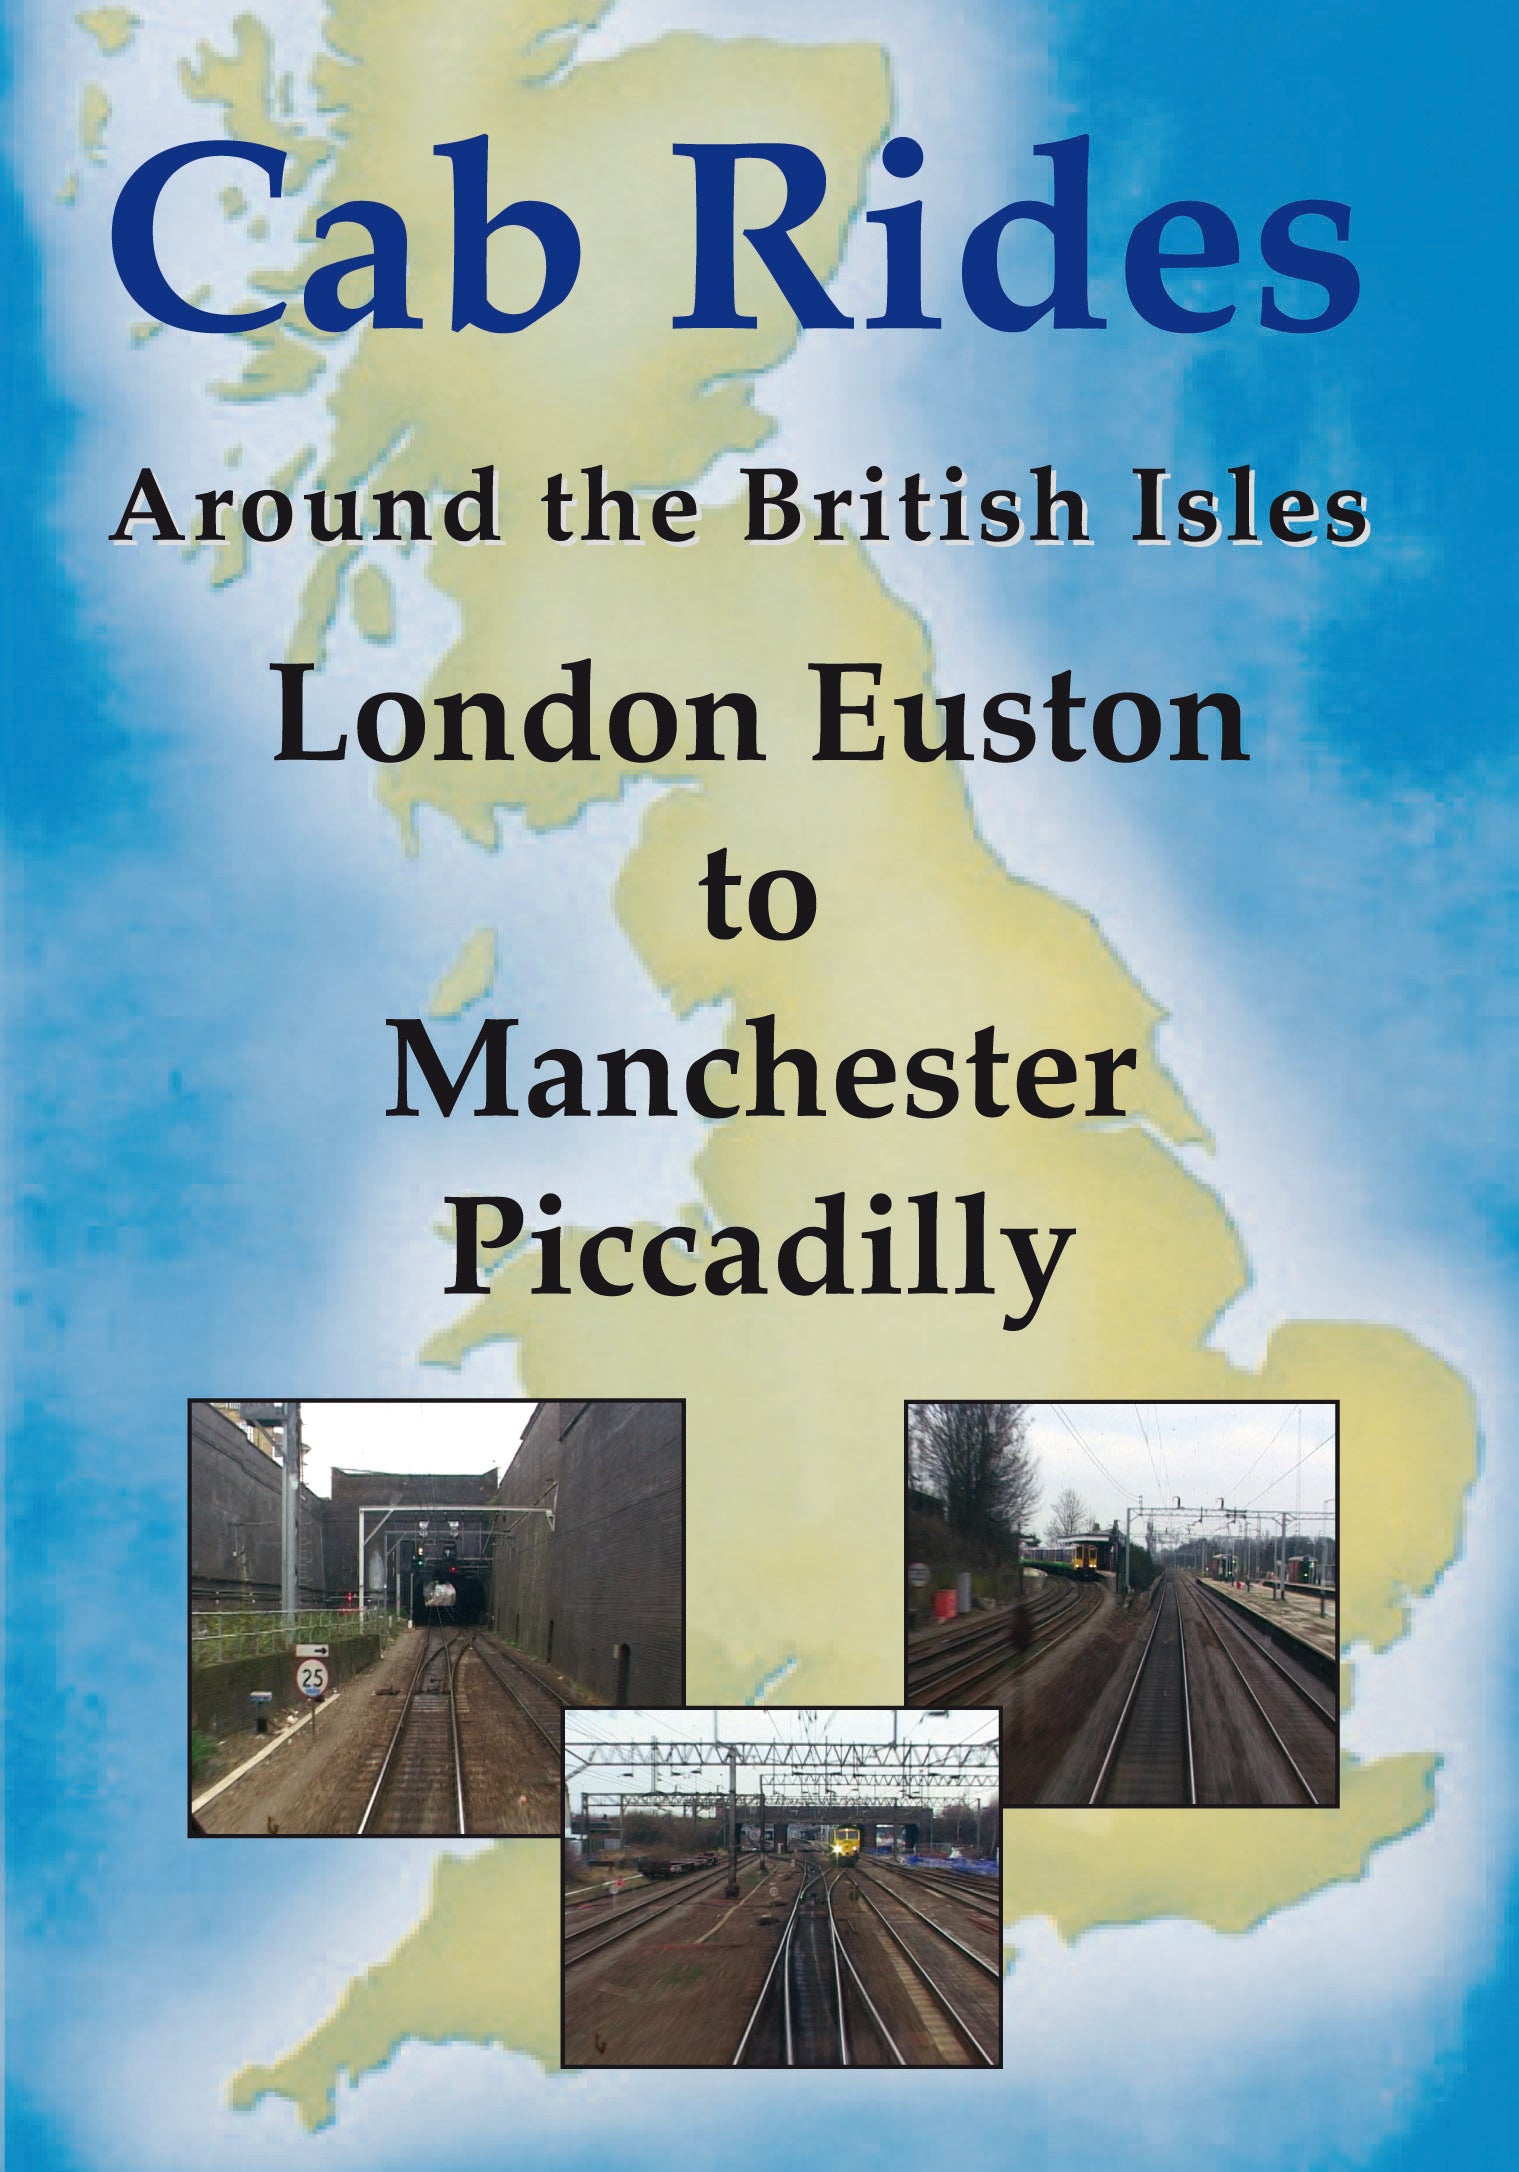 DVD Euston to Manchester Piccadilly Cab Ride